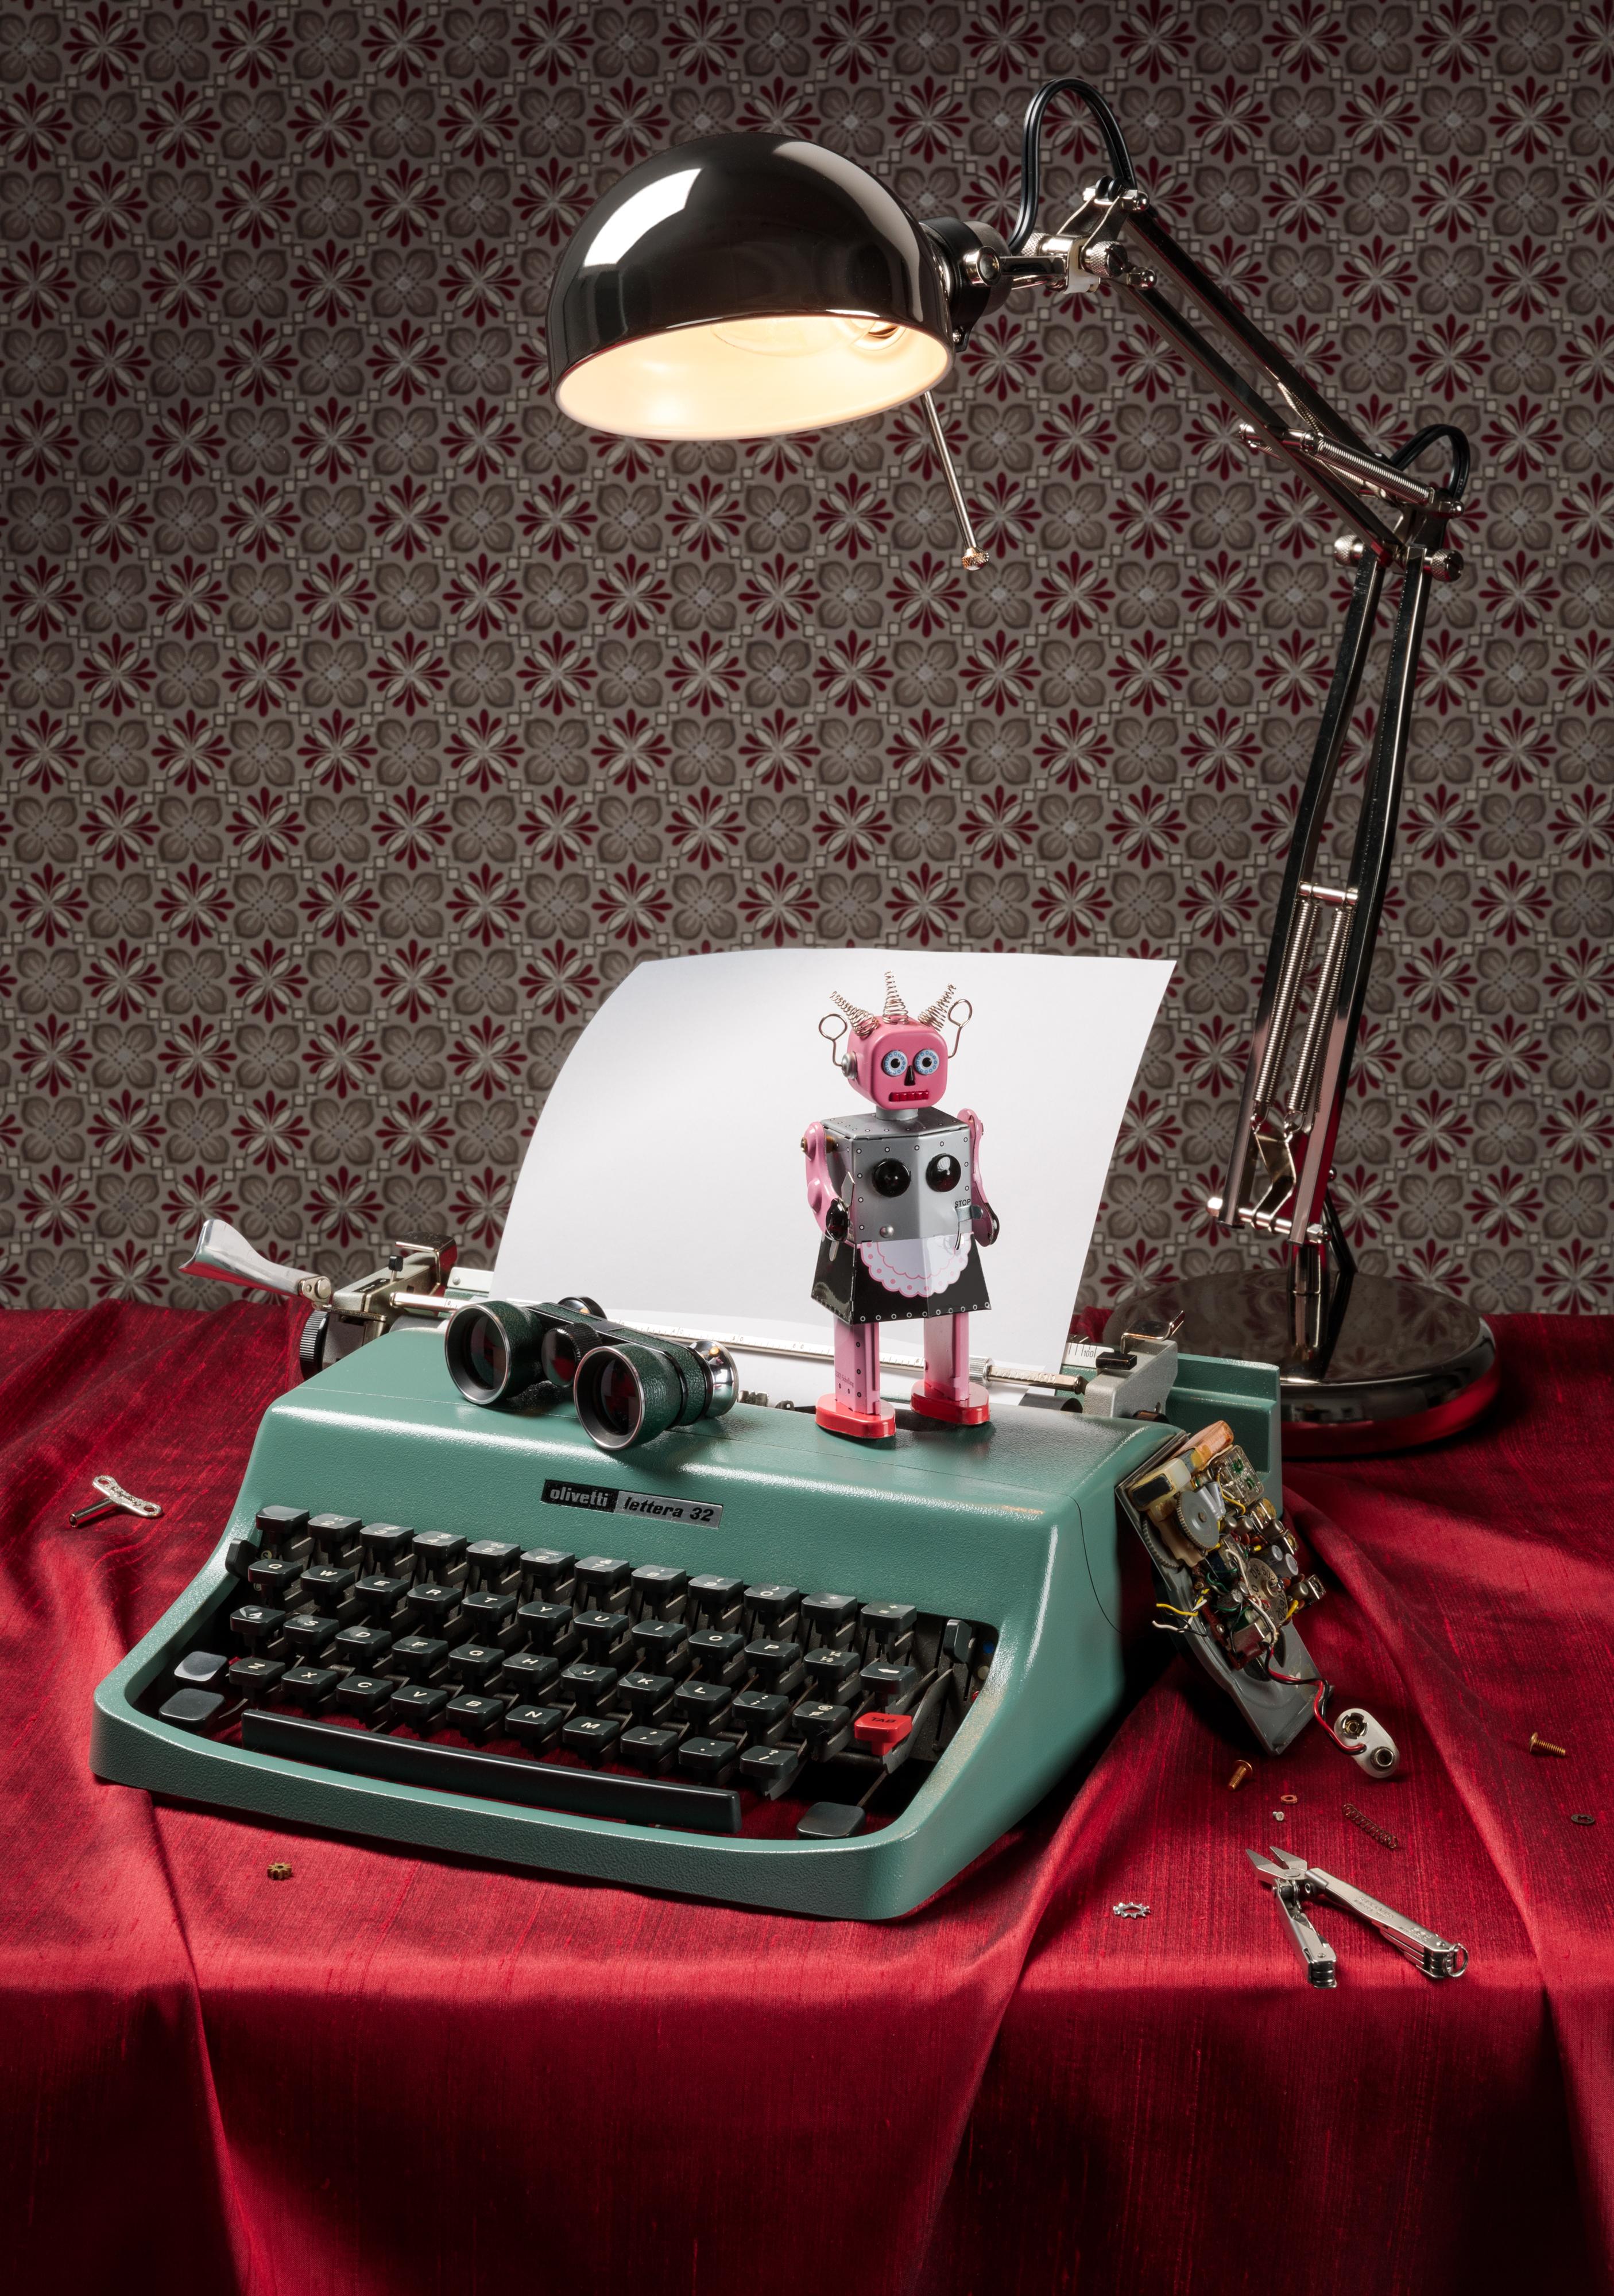 Jeanette May Still-Life Print - New Still-life Photograph with Vintage Typewriter, “Still Life with Robot” 